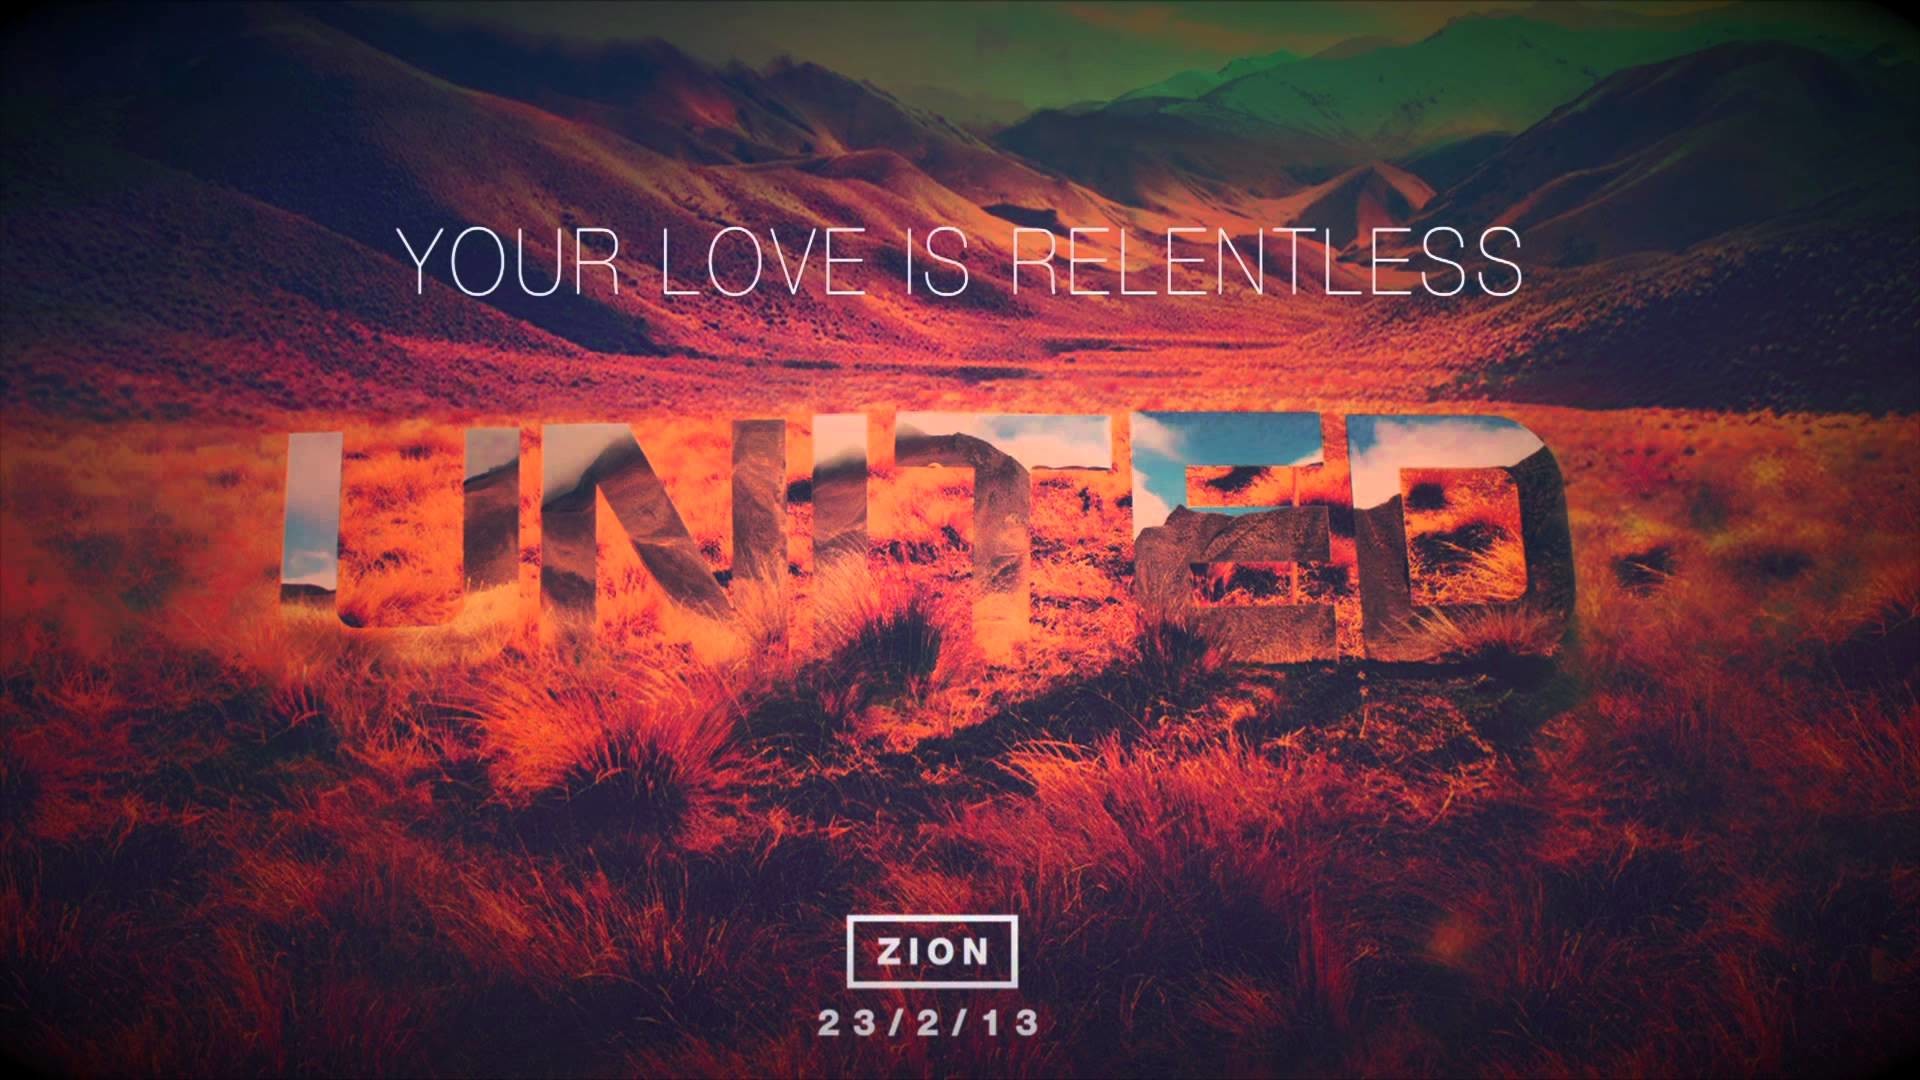 1920x1080 Hillsong United 2015 Wallpapers - Wallpaper Cave